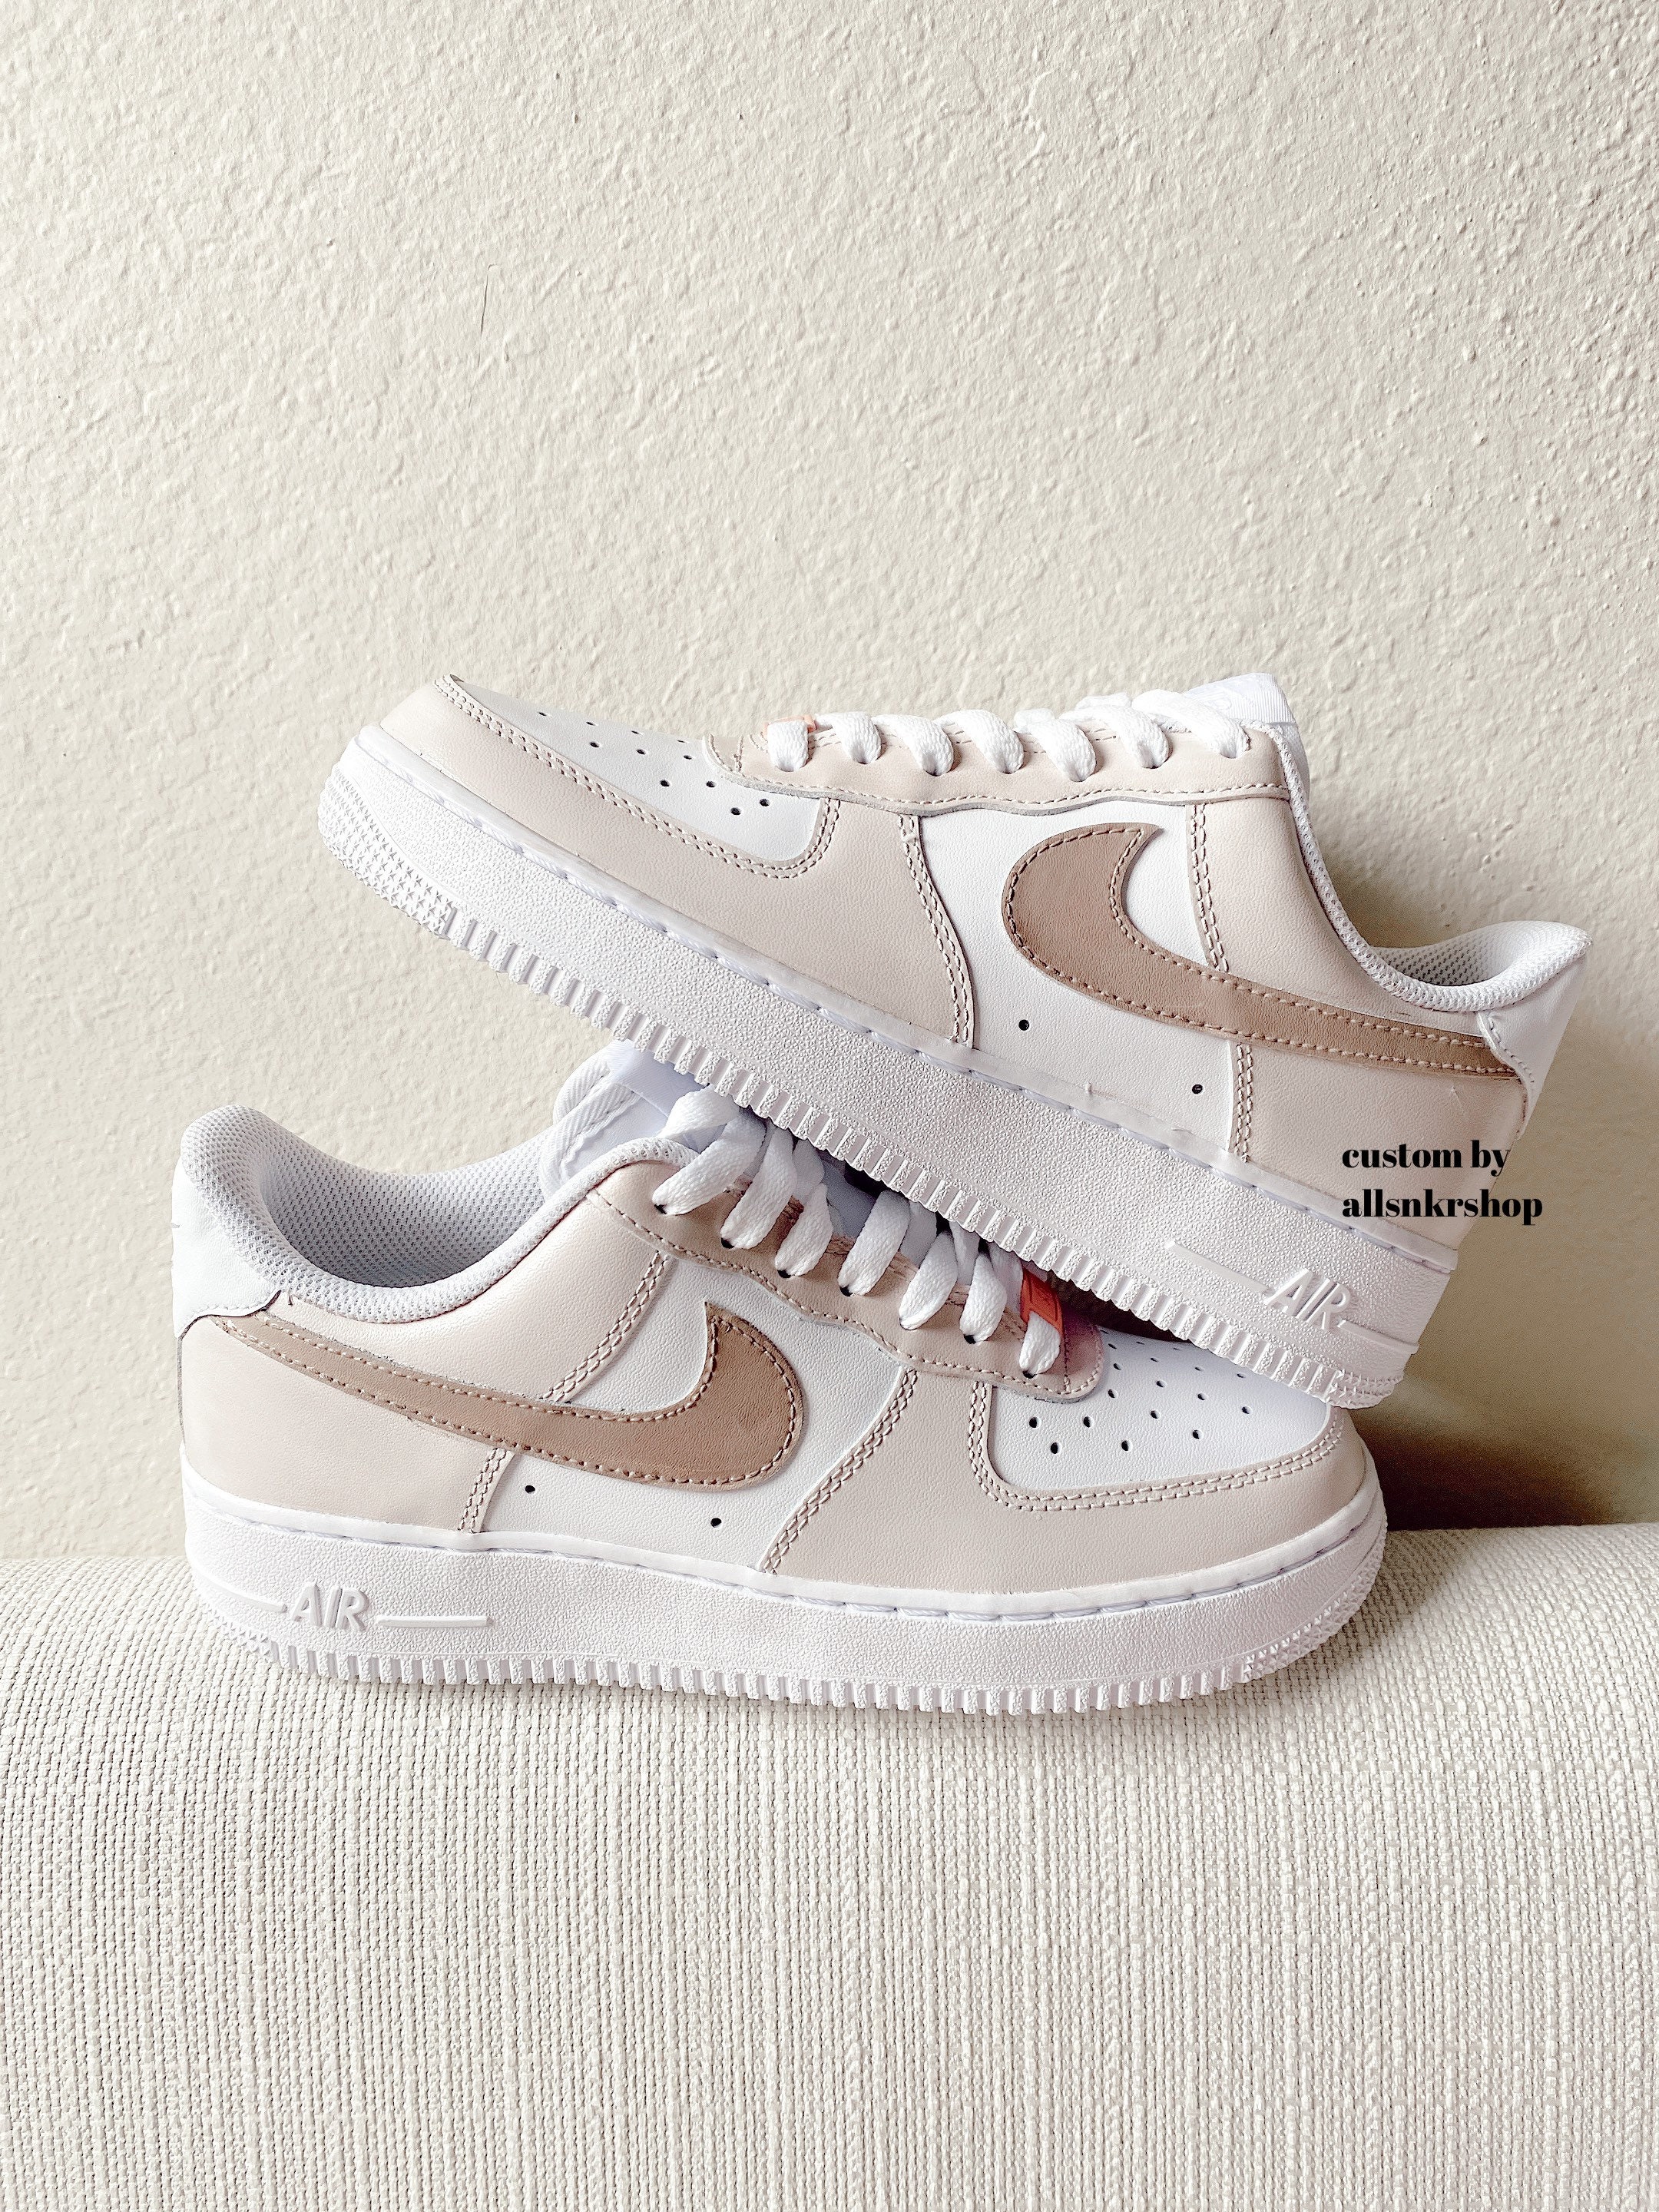 nude suede air force 1